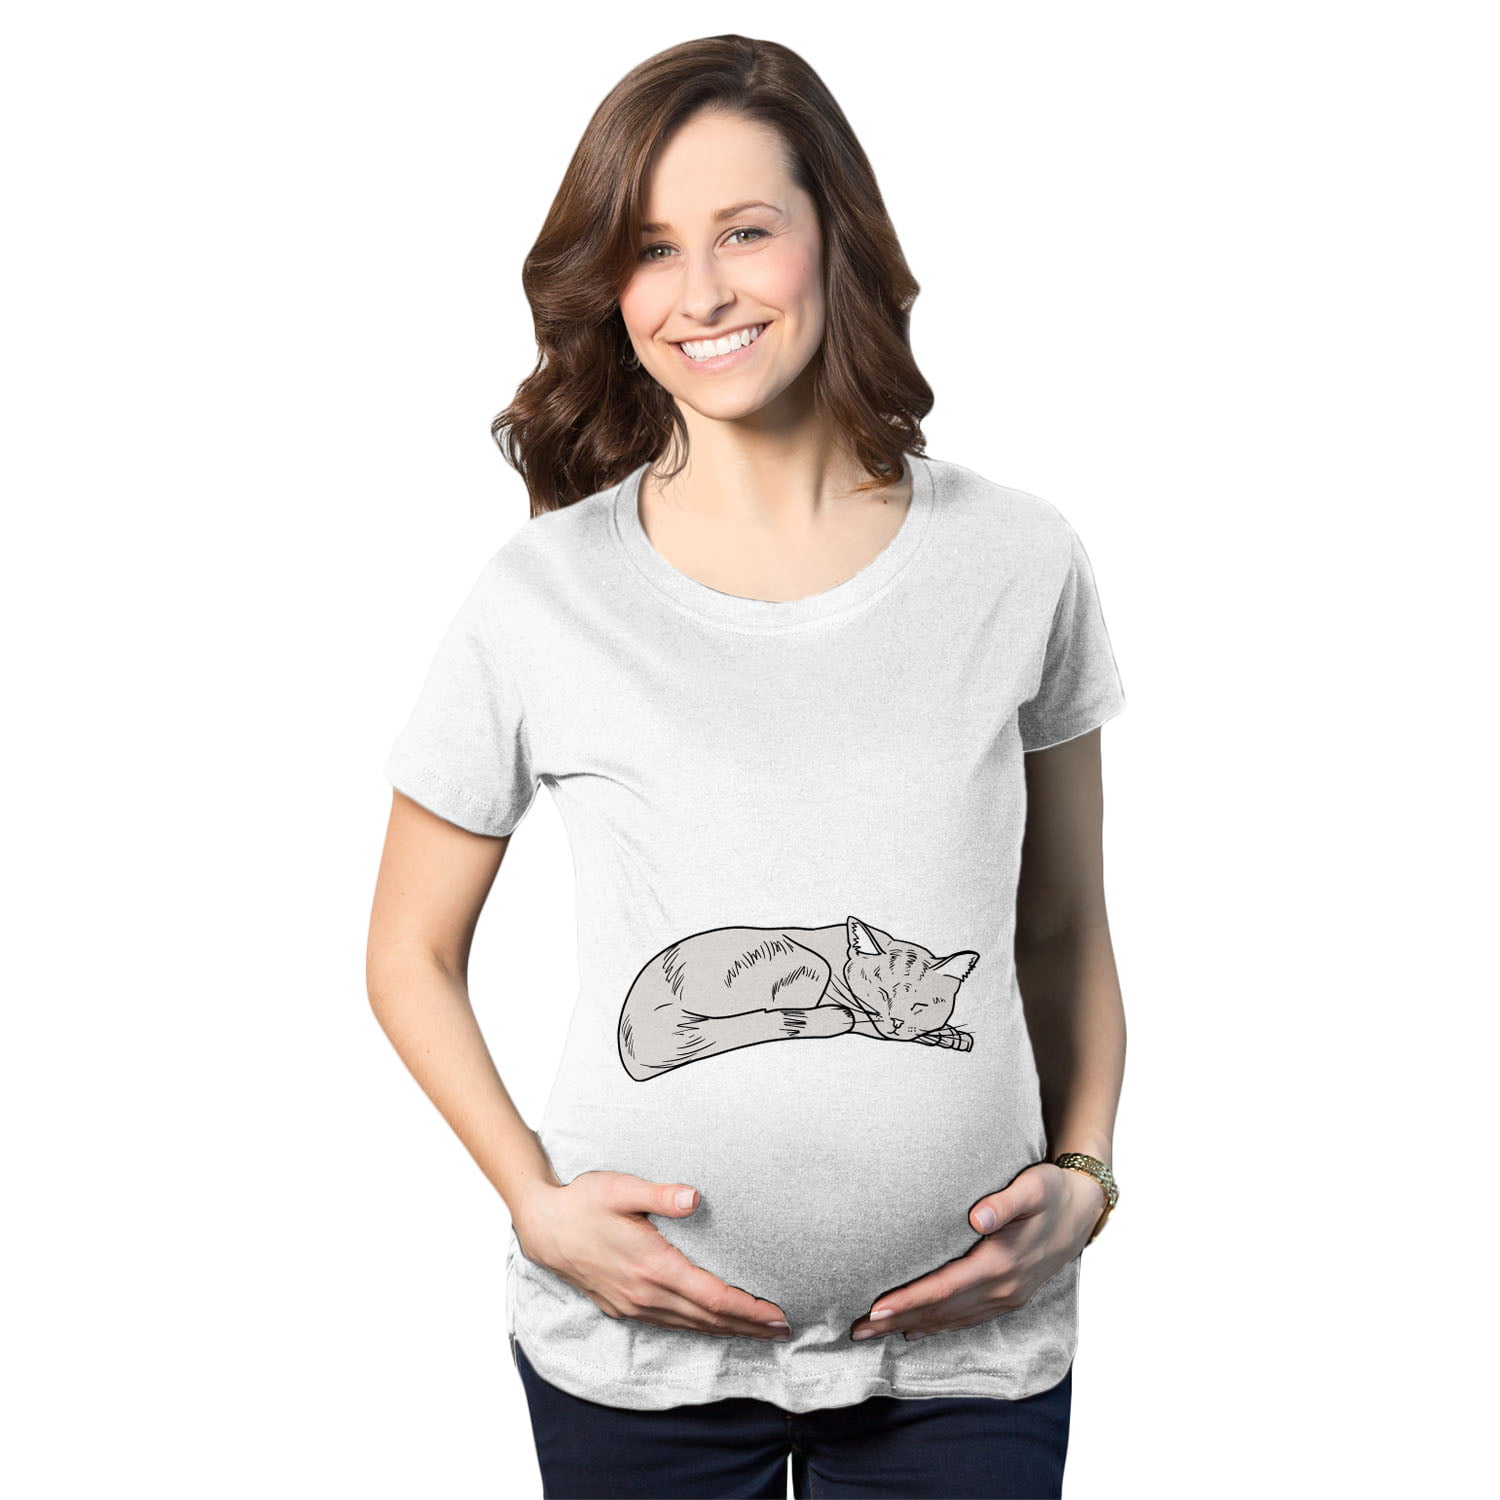 Xpenyo Womens Maternity T Shirts Short Sleeve Tiered Basic Casual Pregnancy Top